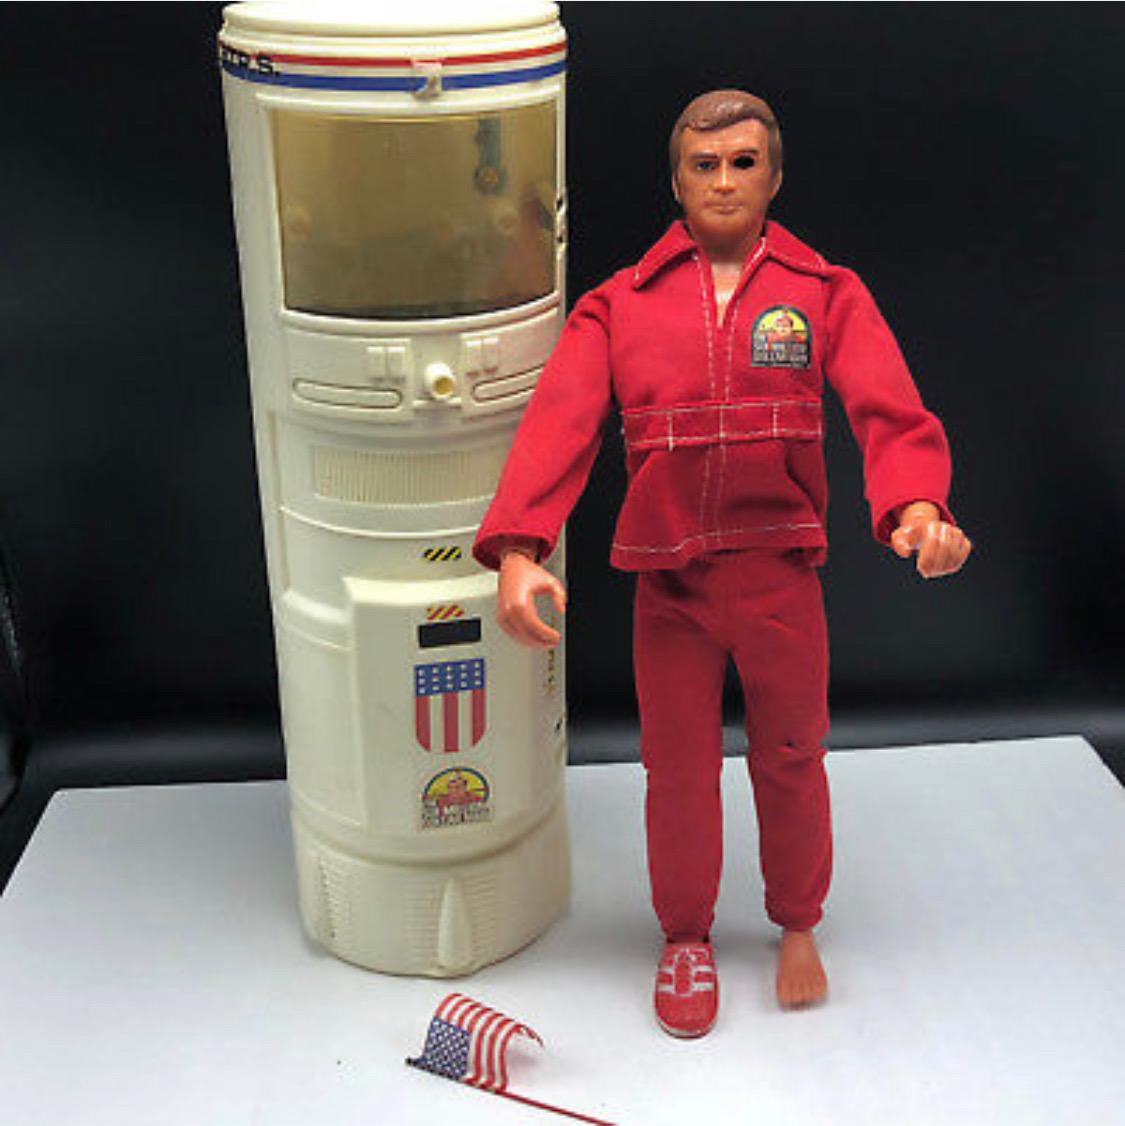 Next:‘The Six Million Dollar Man’No nostalgic list can be complete without Lee Majors. I watched and enjoyed ‘The Fall Guy’ with its catchy theme tune - but I think his finest outing was in ‘The Six Million Dollar Man’. Who can forget the greatest action figure ever created!